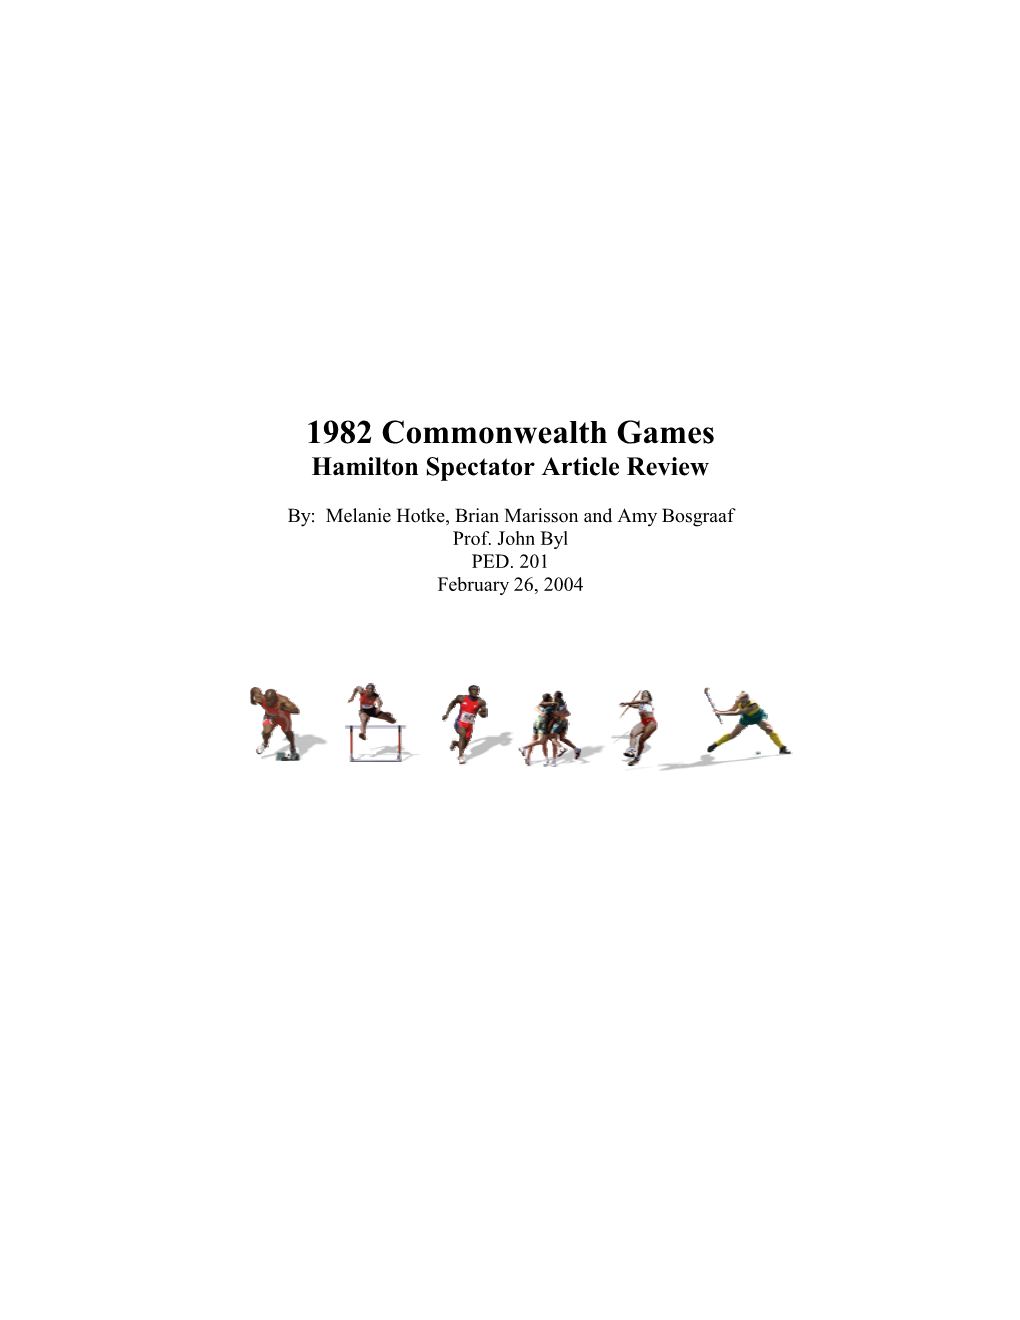 1982 Commonwealth Games Hamilton Spectator Article Review